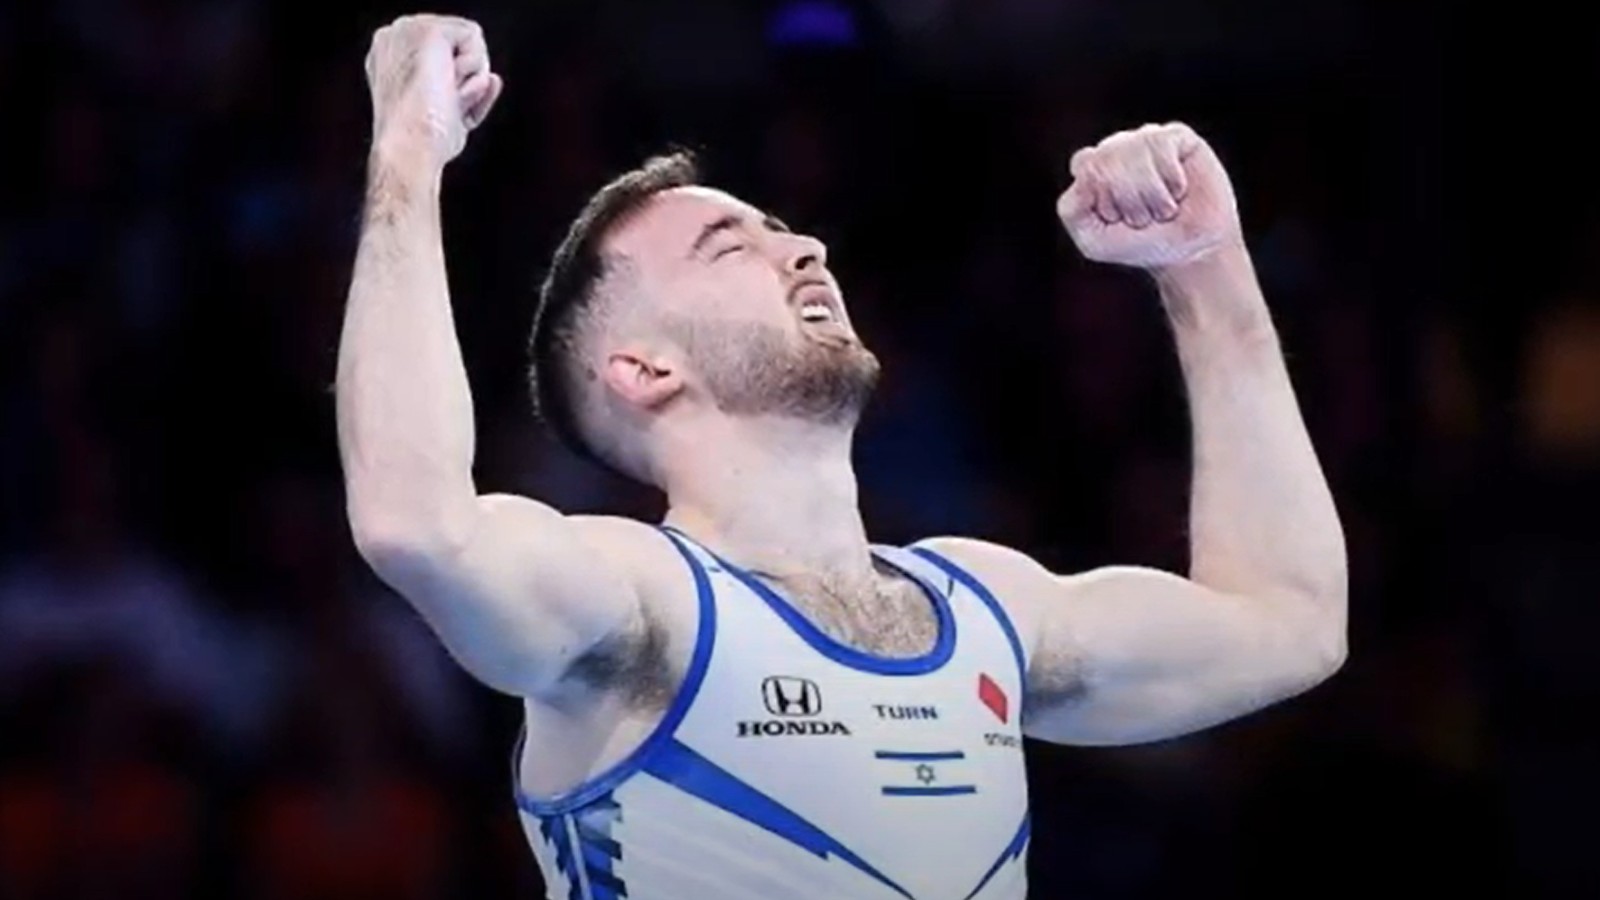 Artem Dolgopyat after his gold medal performance in floor exercise at the Tokyo Olympics. Photo: screenshot